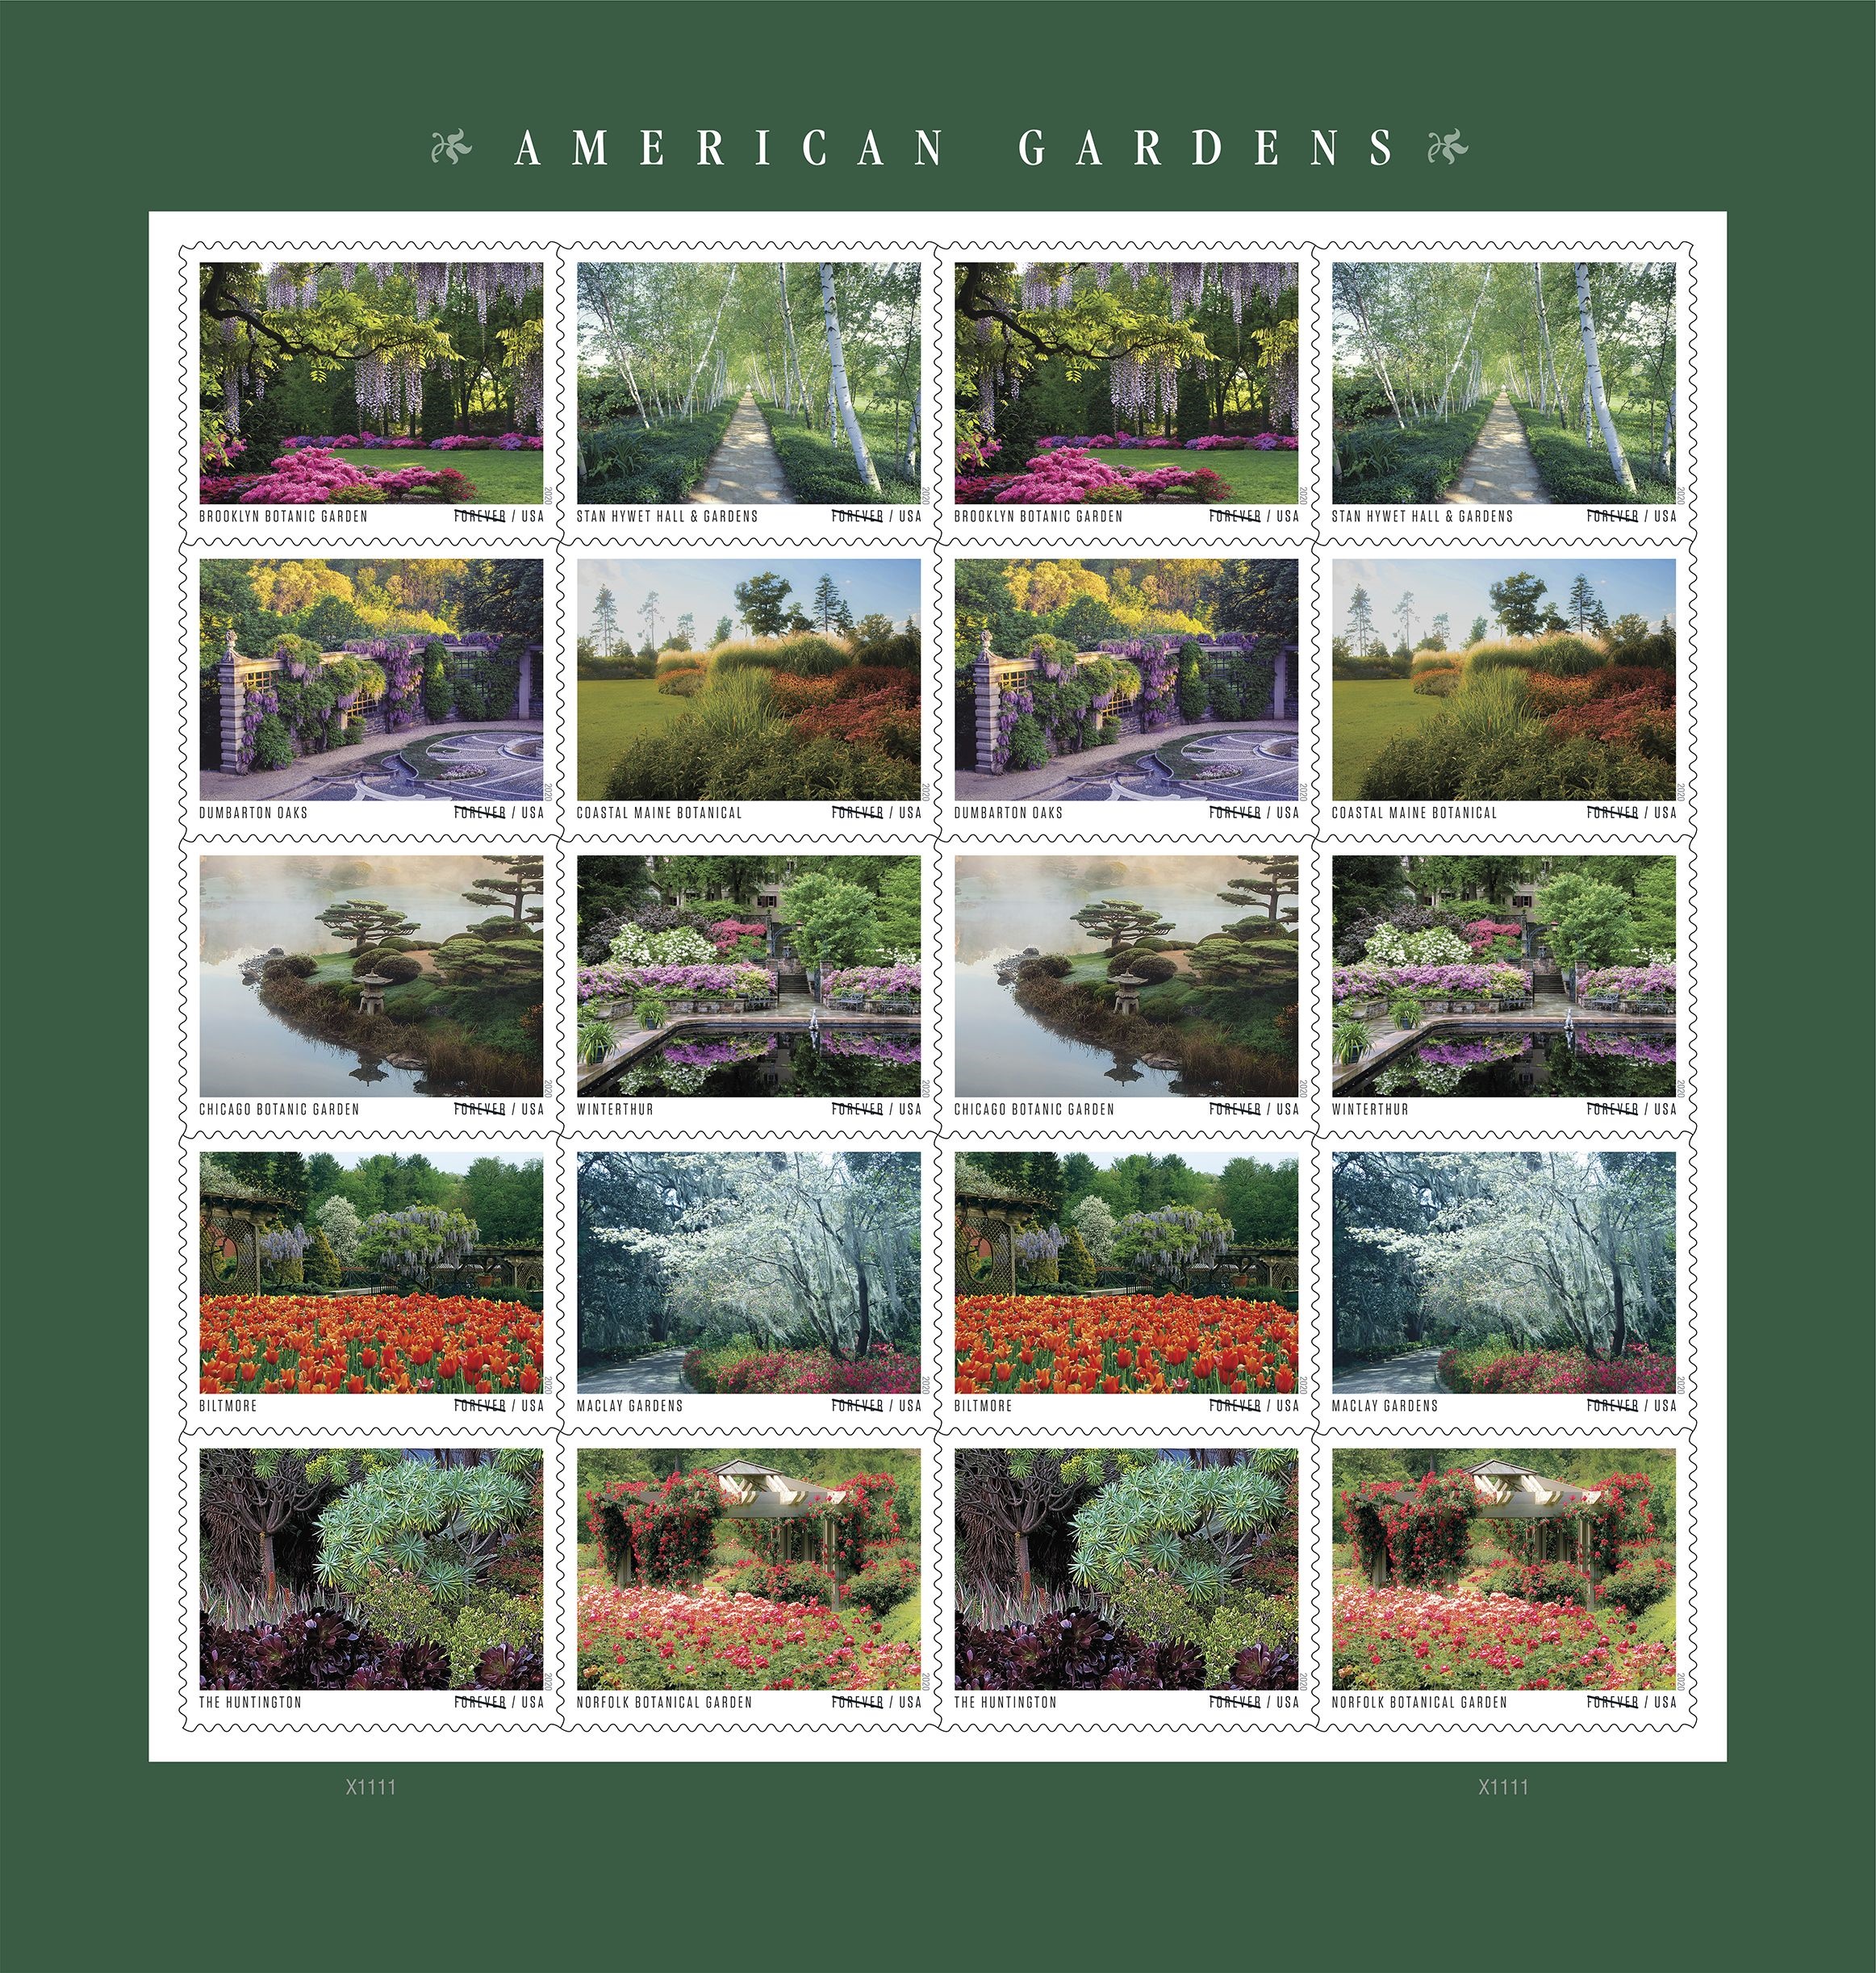 Ten gardens are featured in the American Gardens stamp series.